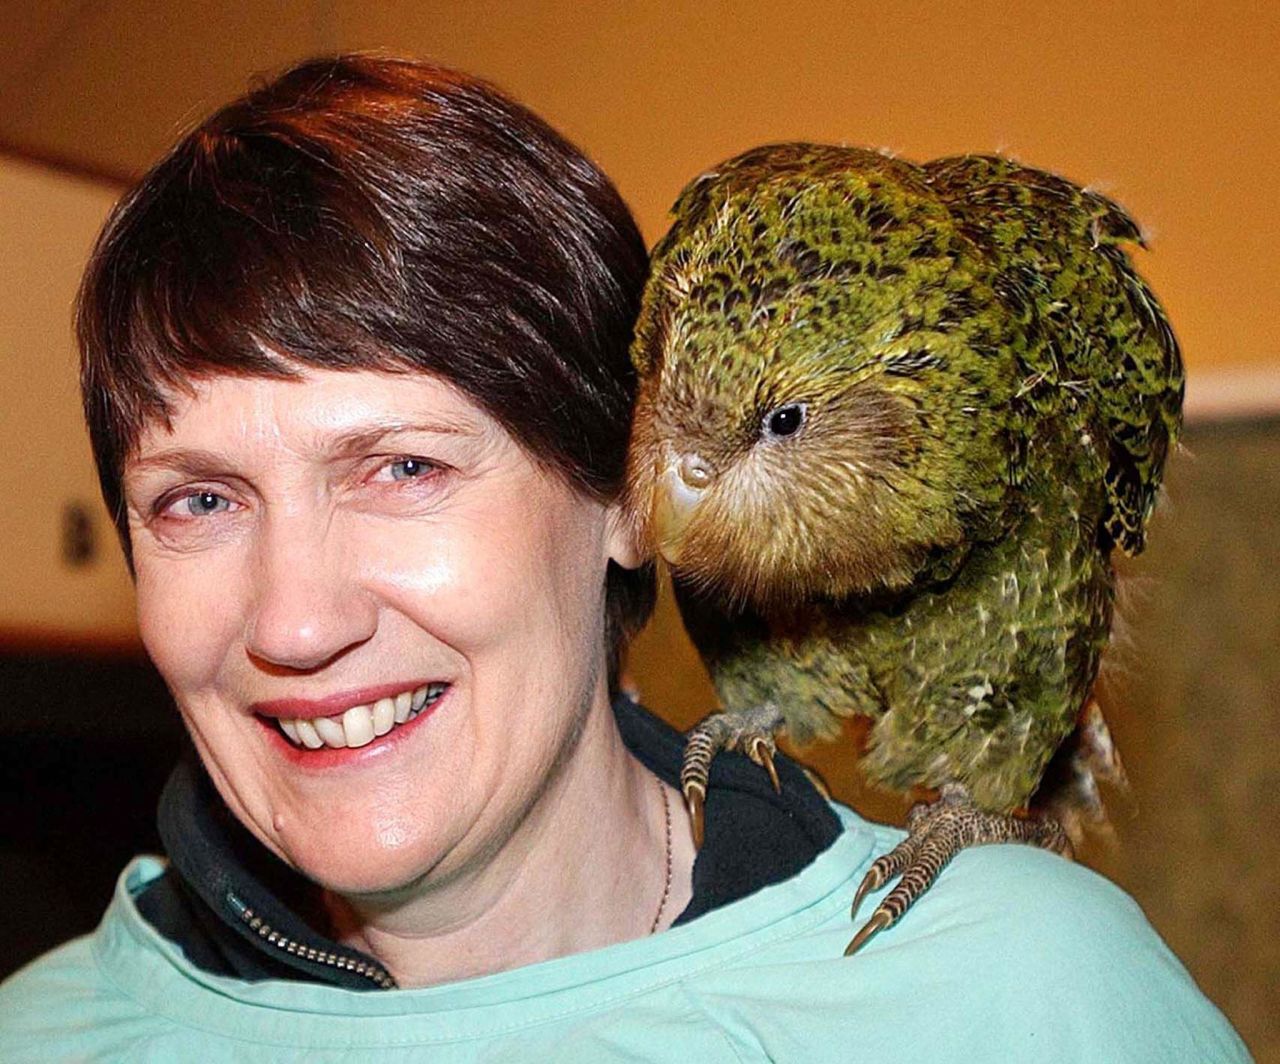 On the right you'll notice a somewhat ugly bird named the kakapo, a critically endangered parrot. It's the only flightless parrot in the world and has very muscular thighs, according to the British Science Association. On the left is former New Zealand Prime Minister Helen Clark.  